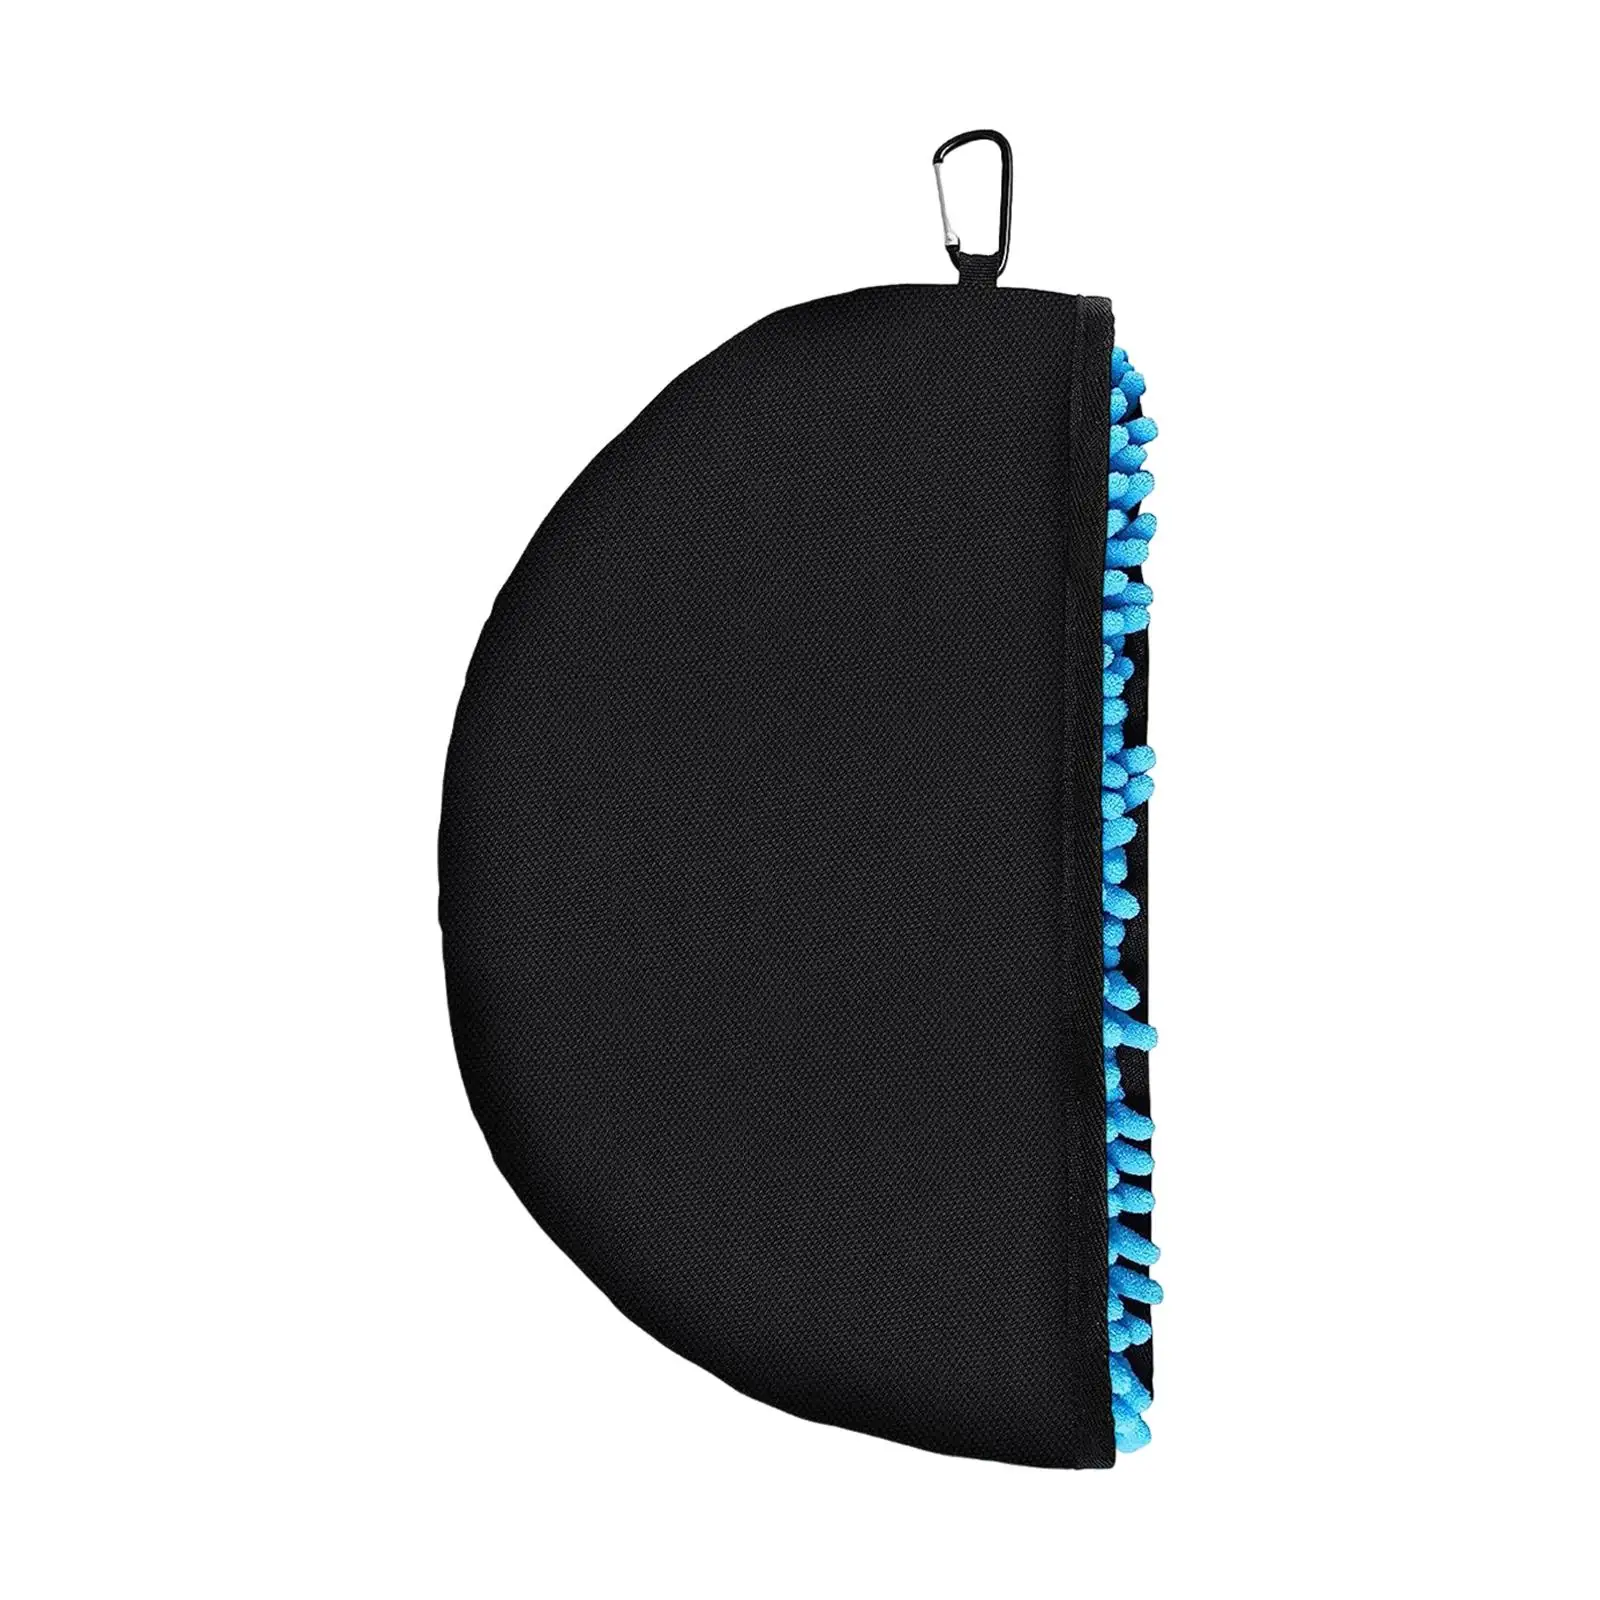 Flying Disc Cleaning Tool Target Accessories Tote Water Resistant Durable Indoor Outdoor Cleaning Towel Case for Travel Sports